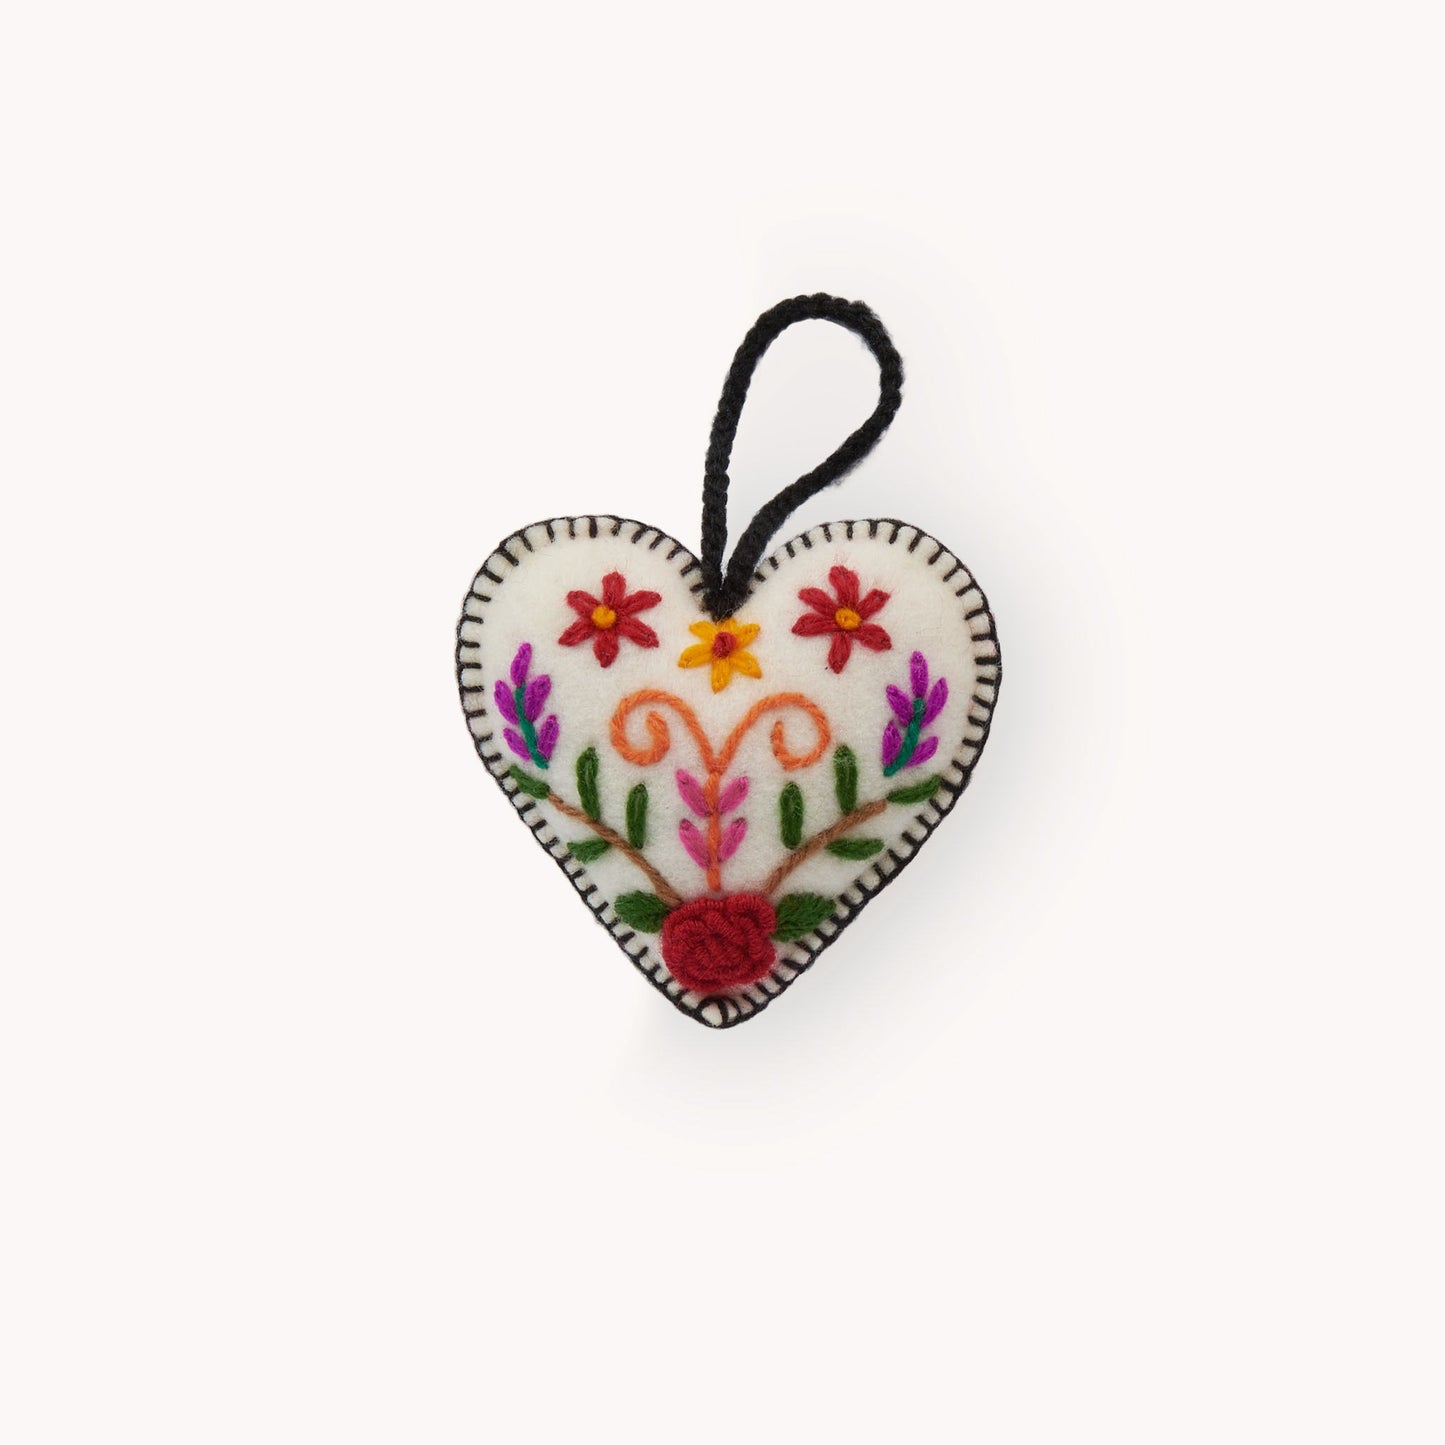 Hand Embroidered Ornament - Floral Heart